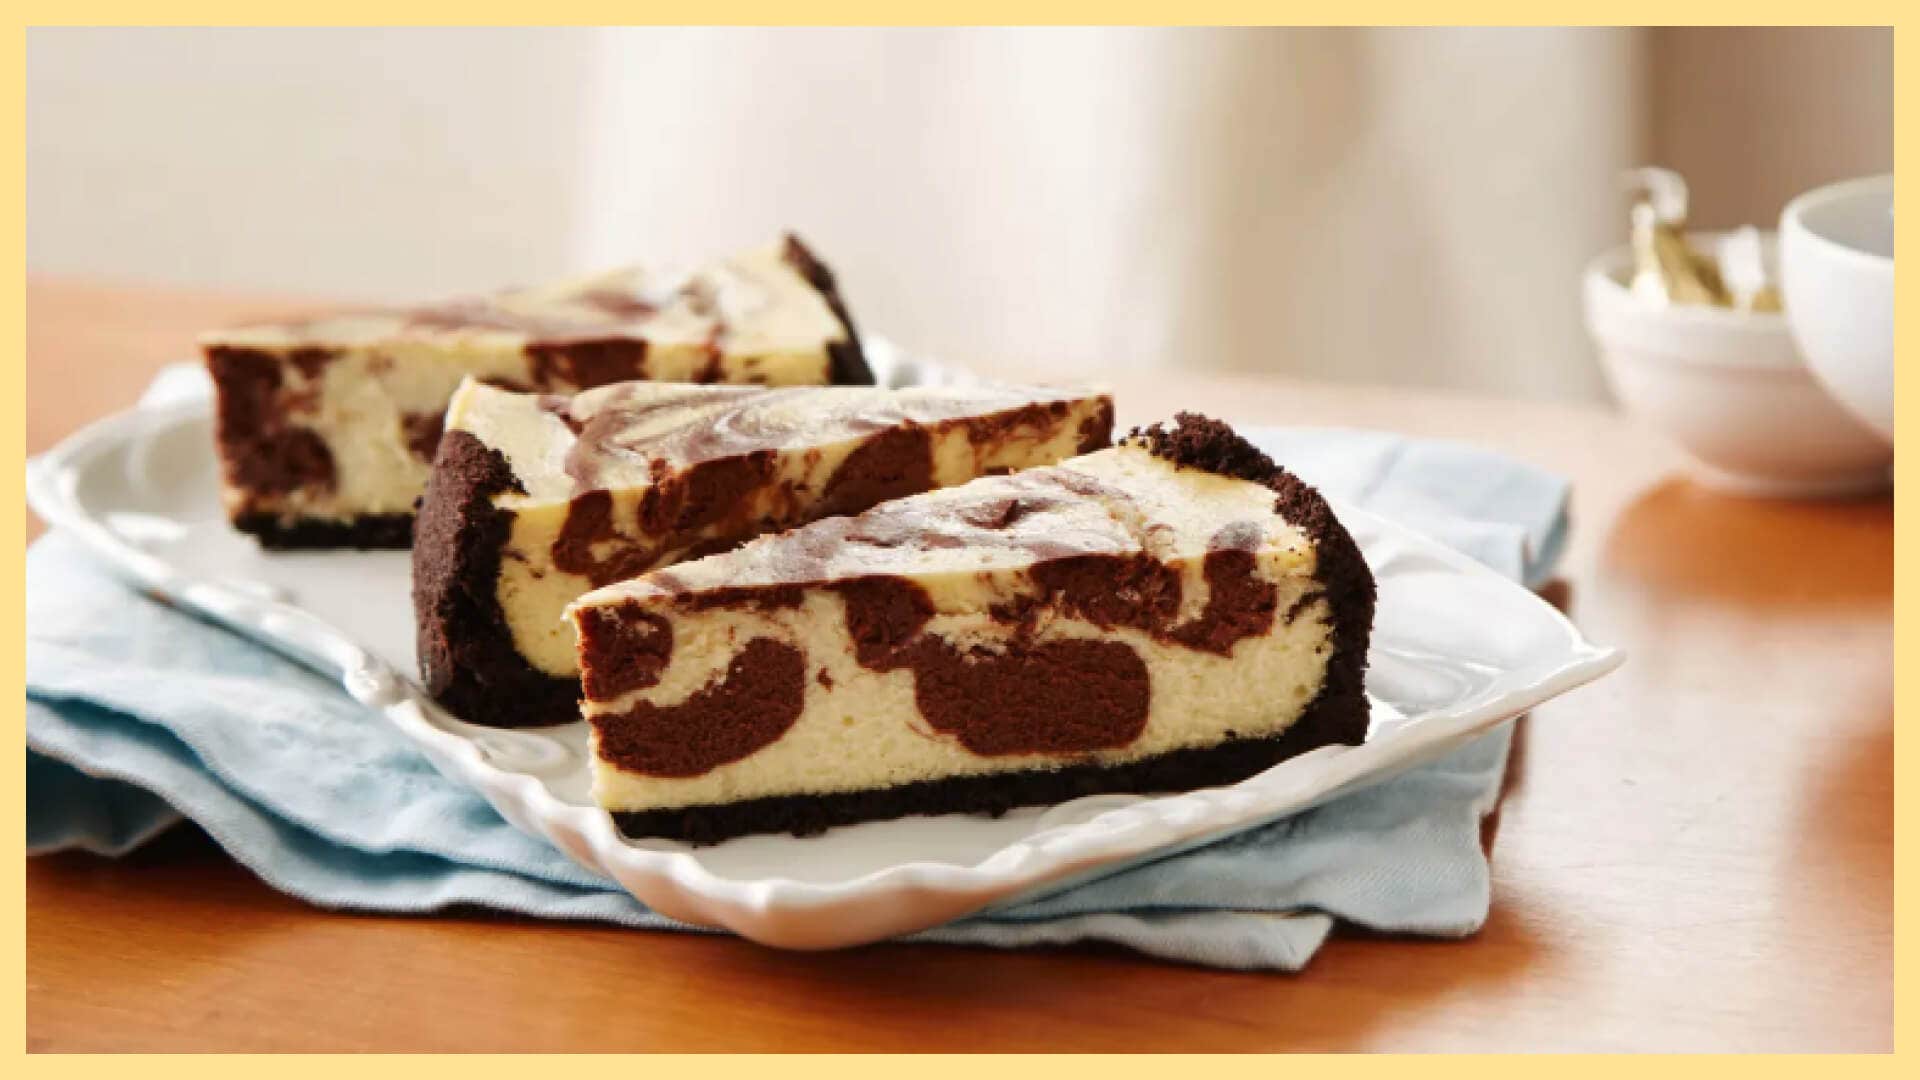 serving plate with three slices of chocolate swirl cheesecake with chocolate crust